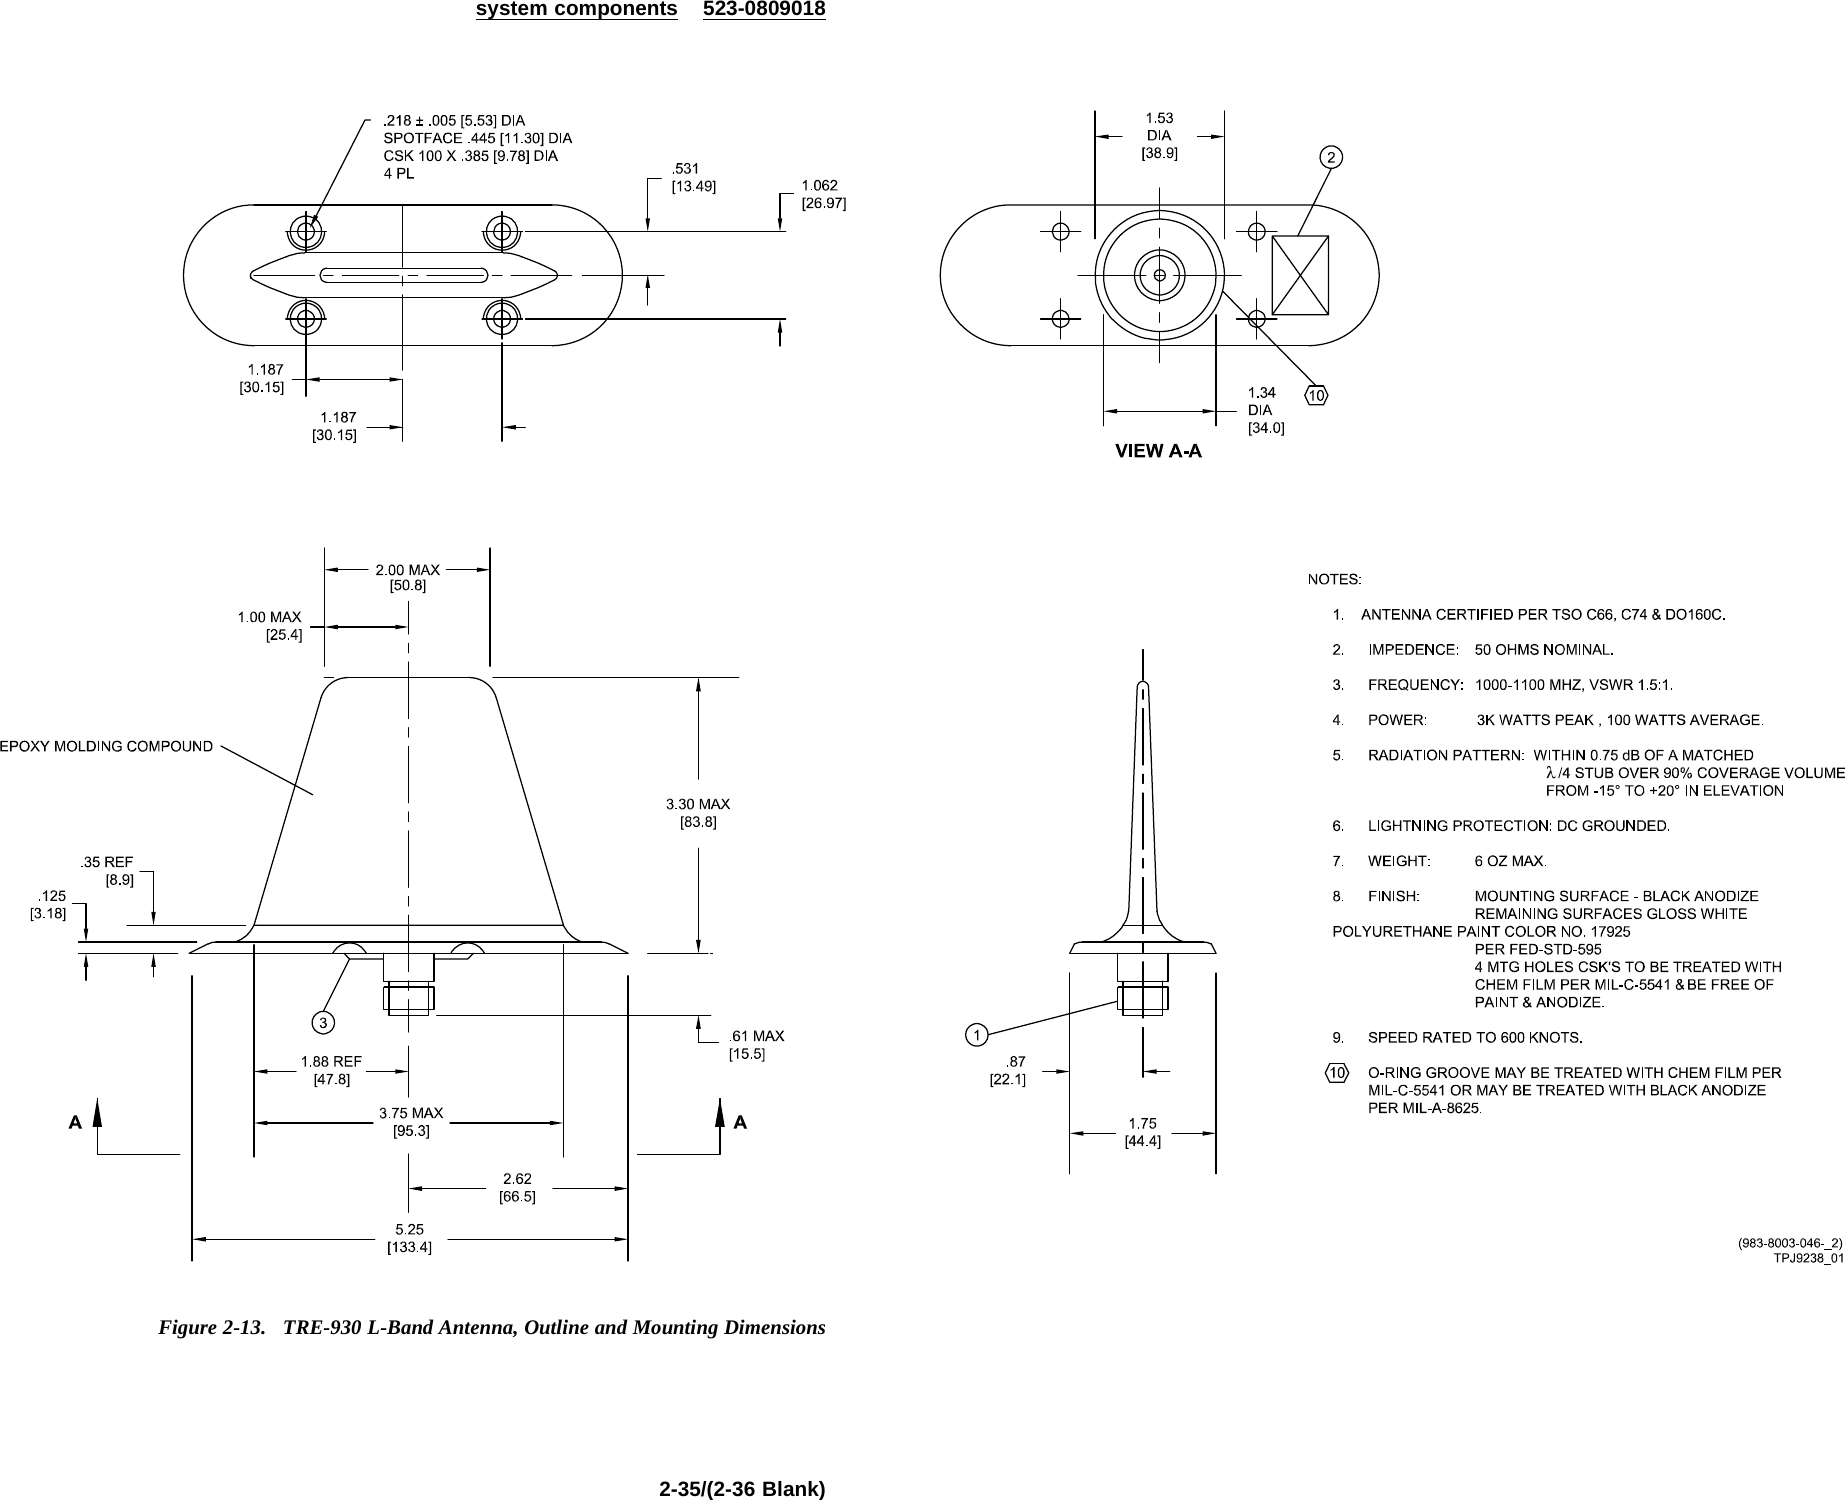 system components 523-0809018Figure 2-13. TRE-930 L-Band Antenna, Outline and Mounting Dimensions2-35/(2-36 Blank)